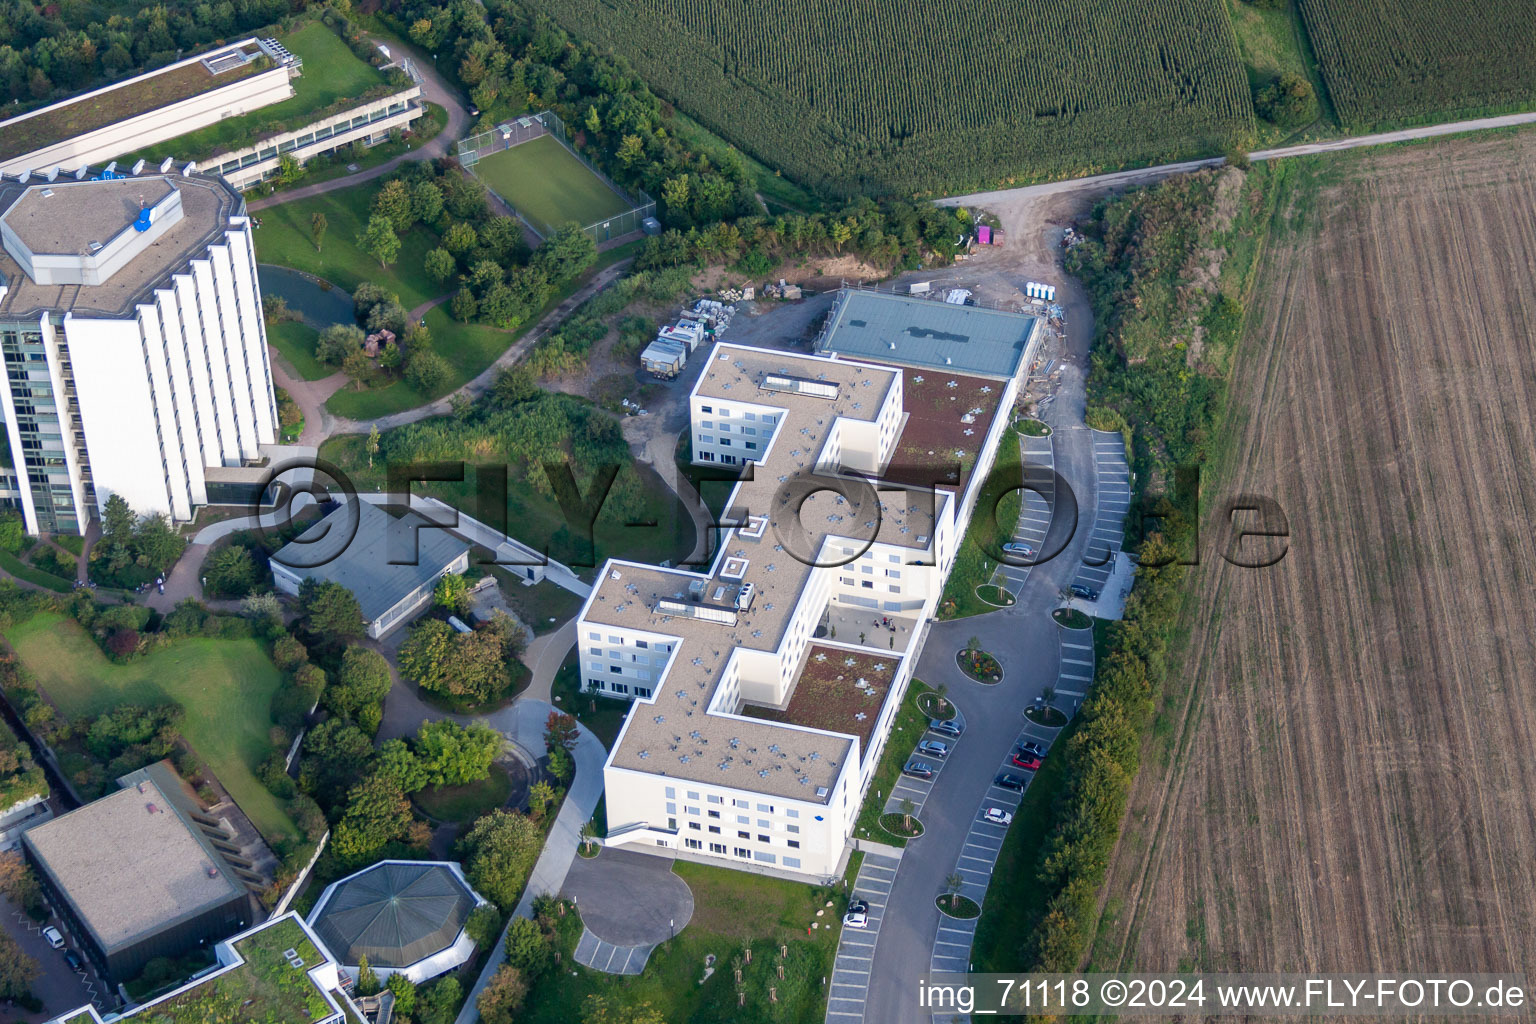 BG accident clinic in the district Oggersheim in Ludwigshafen am Rhein in the state Rhineland-Palatinate, Germany from above